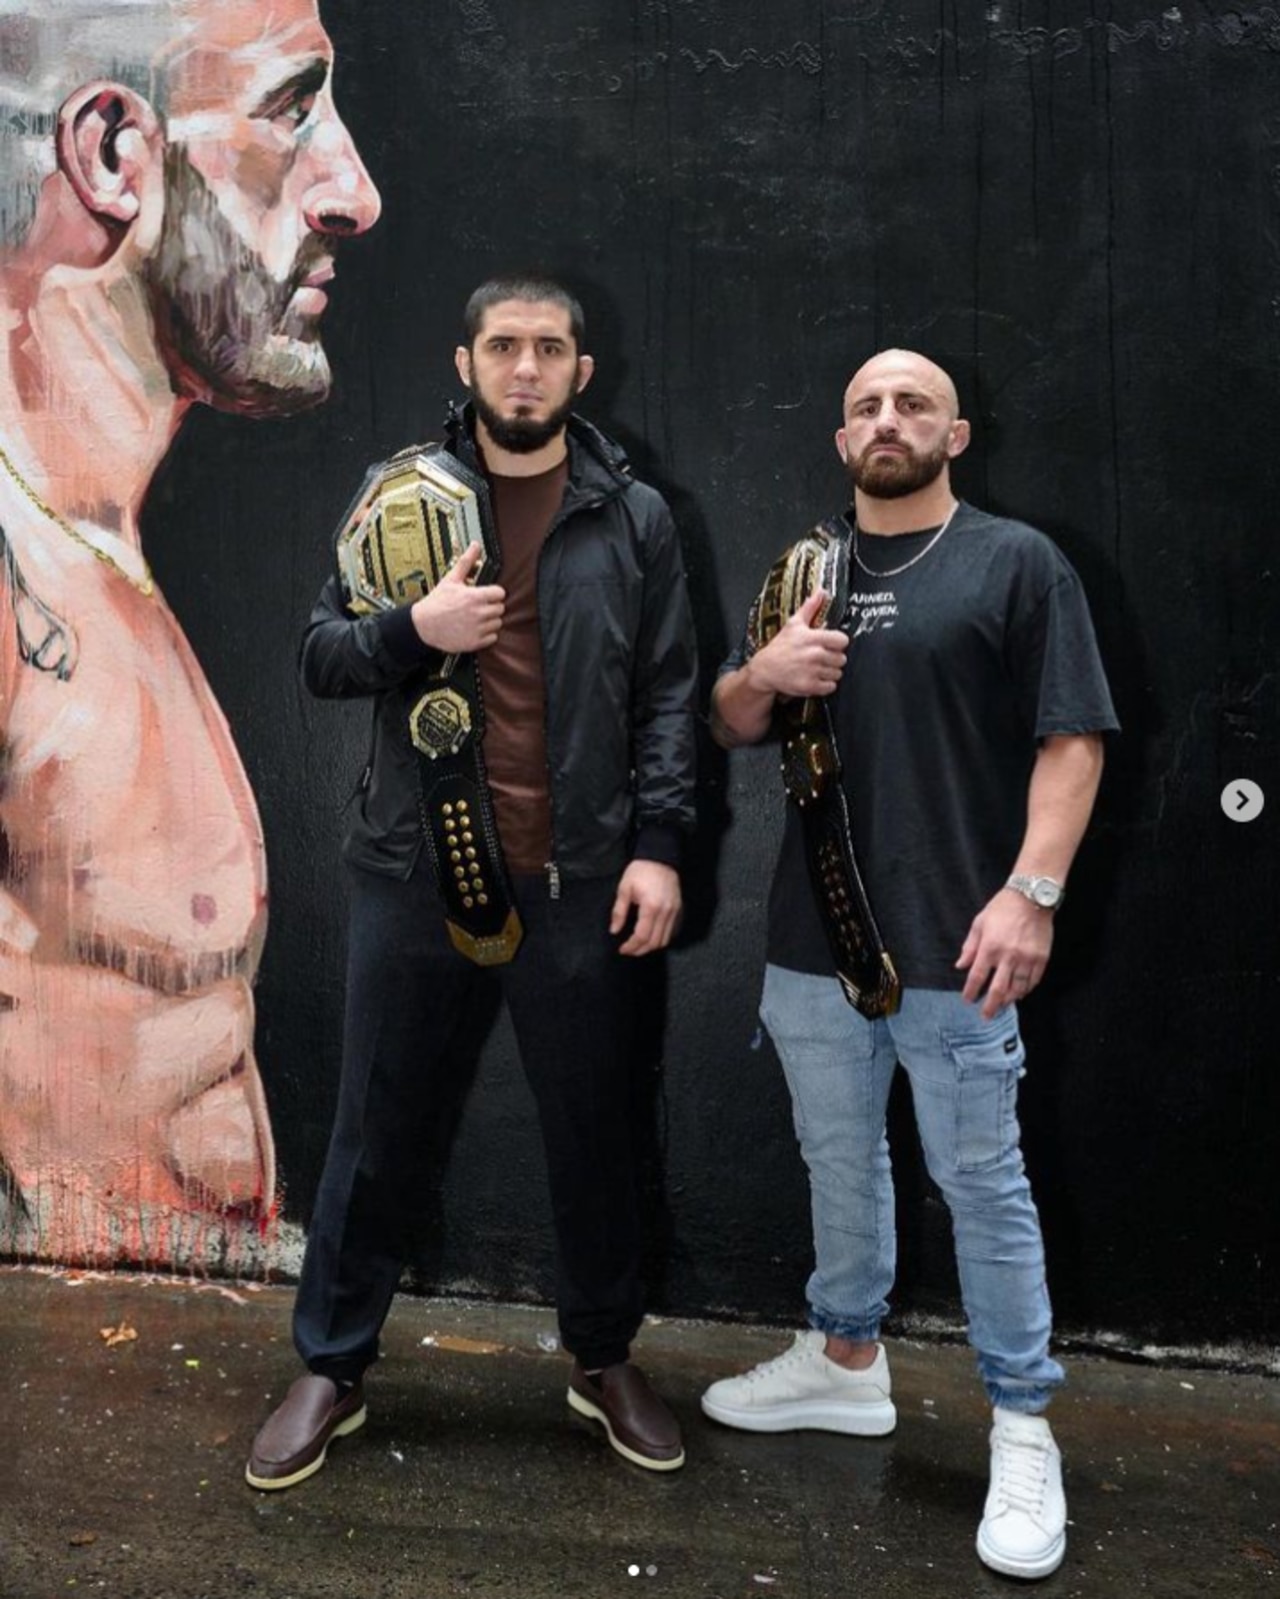 Islam Makhachev (L) and Alexander Volkanovski (R) face-off in Sydney ahead of their title fight at UFC 284 in Perth. (Photo via Islam Makhachev/Instagram)